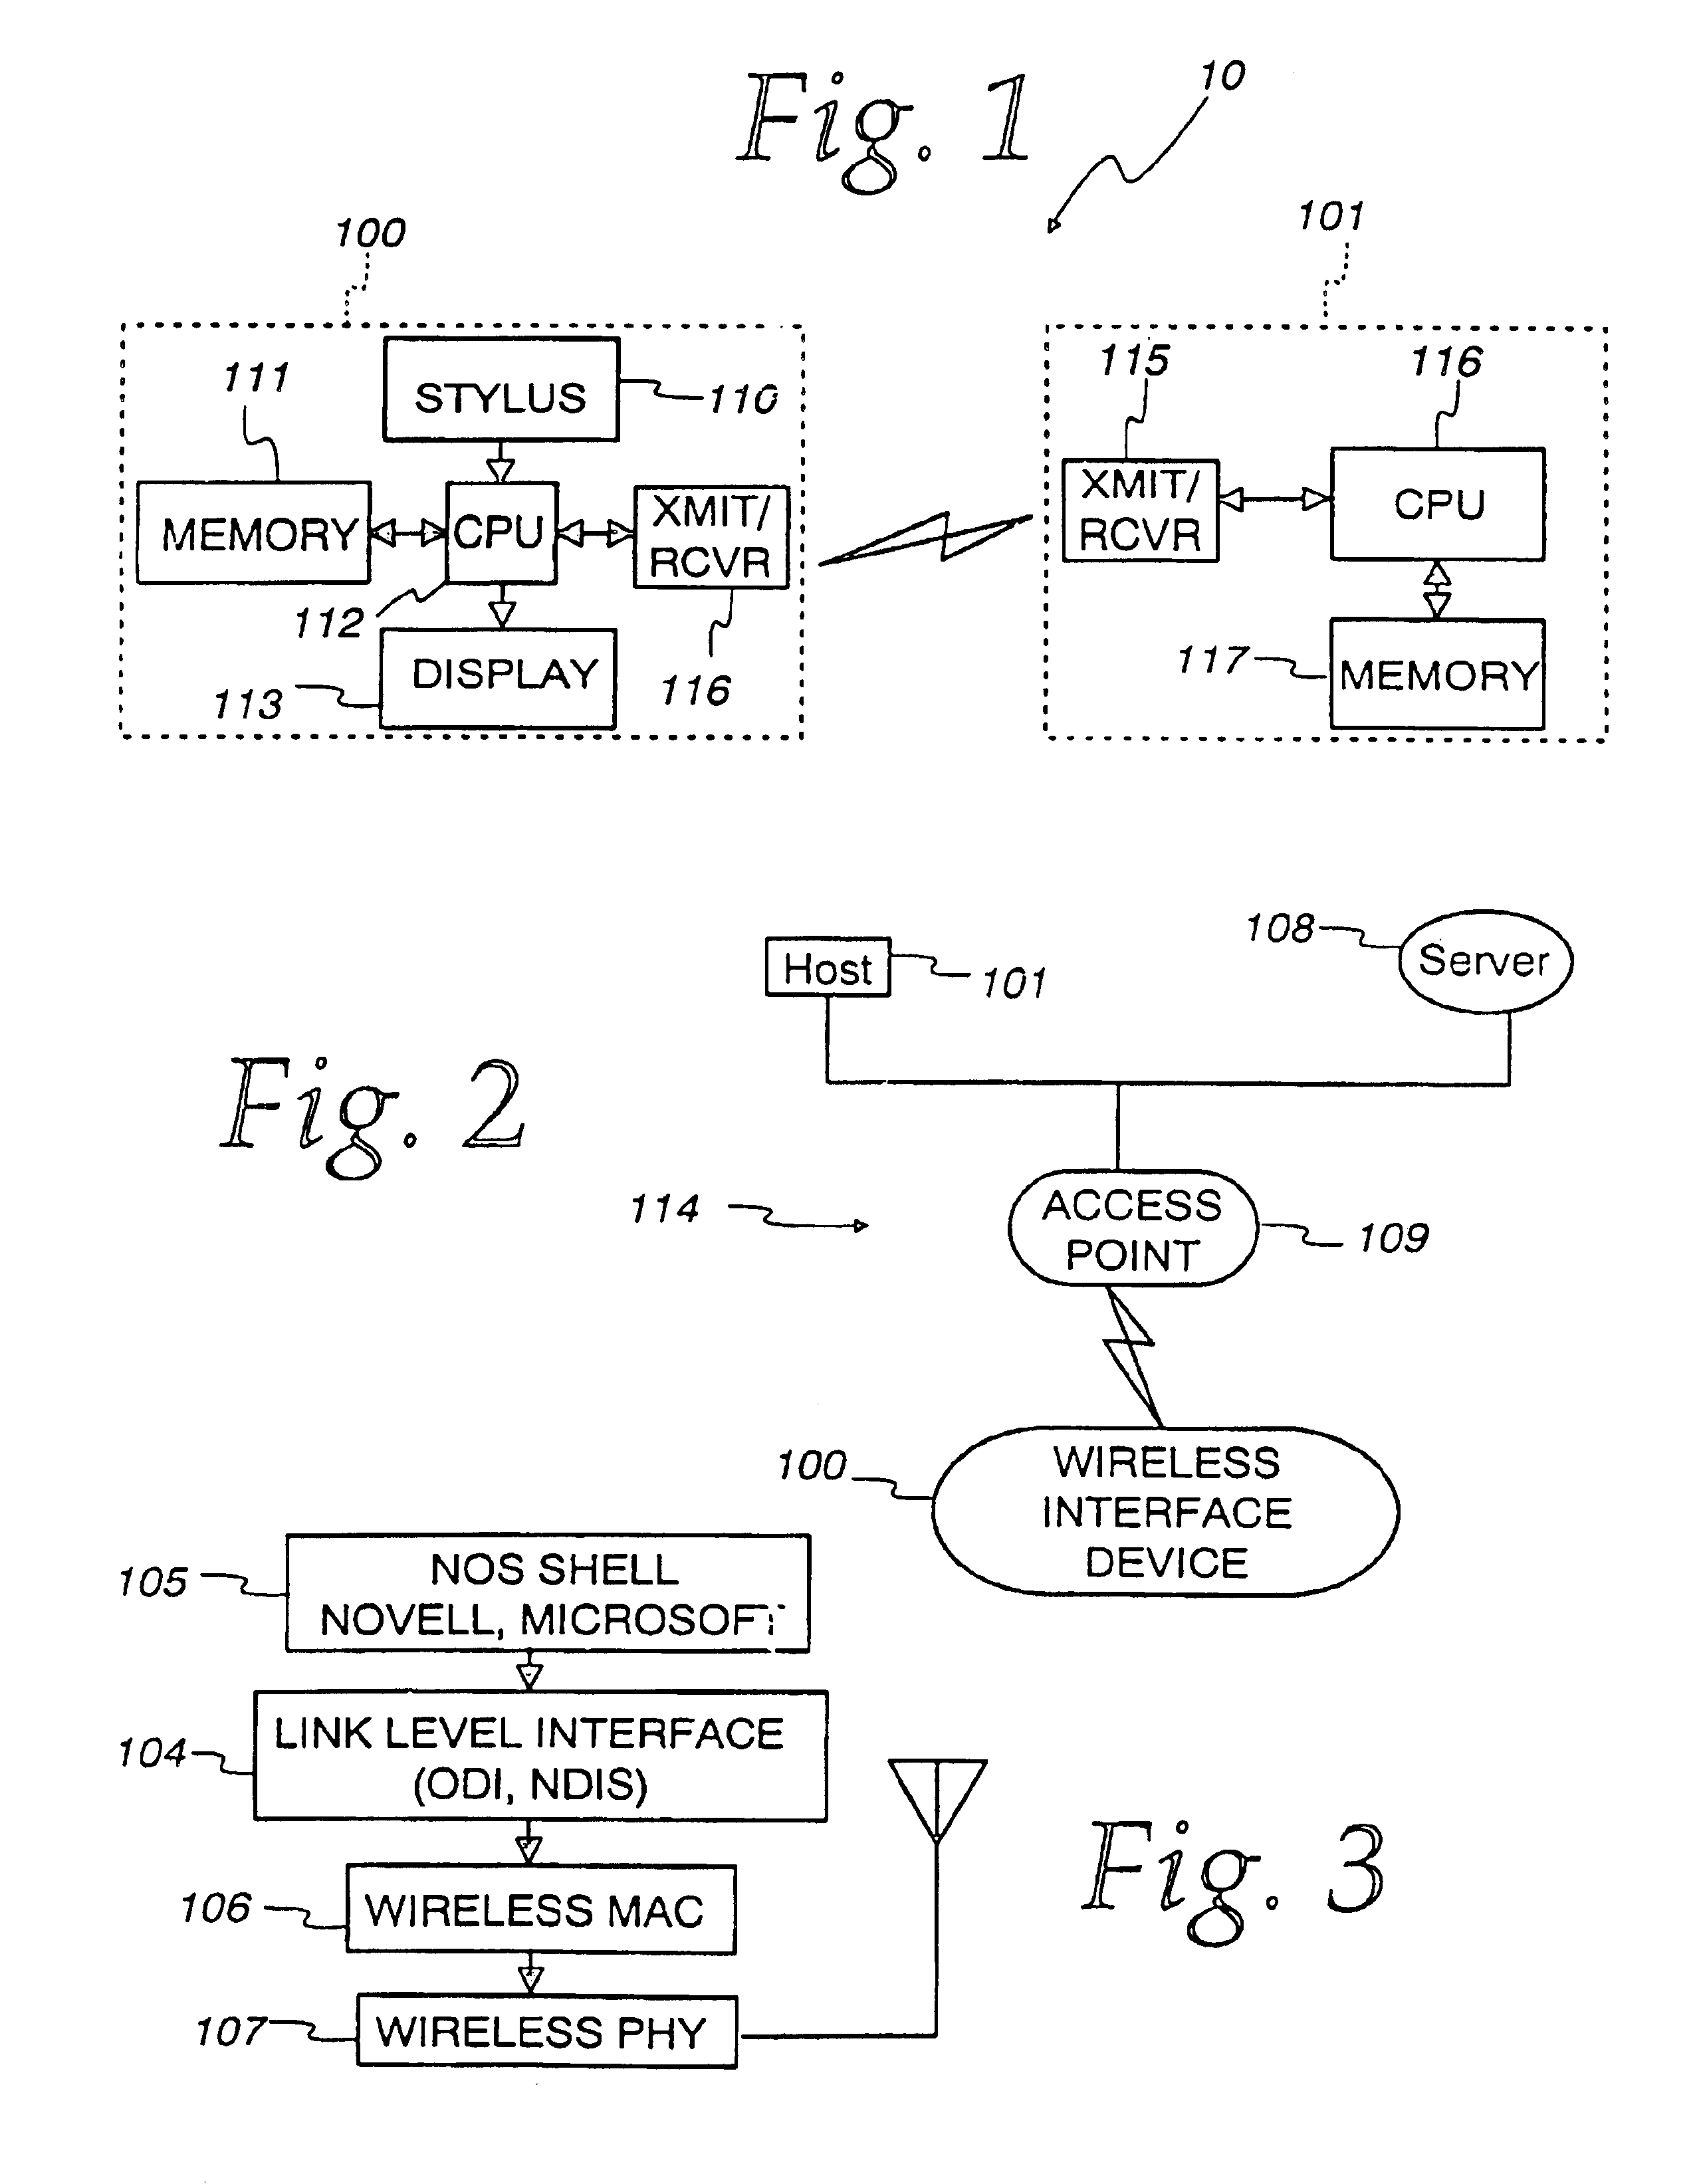 Mode switching for pen-based computer systems